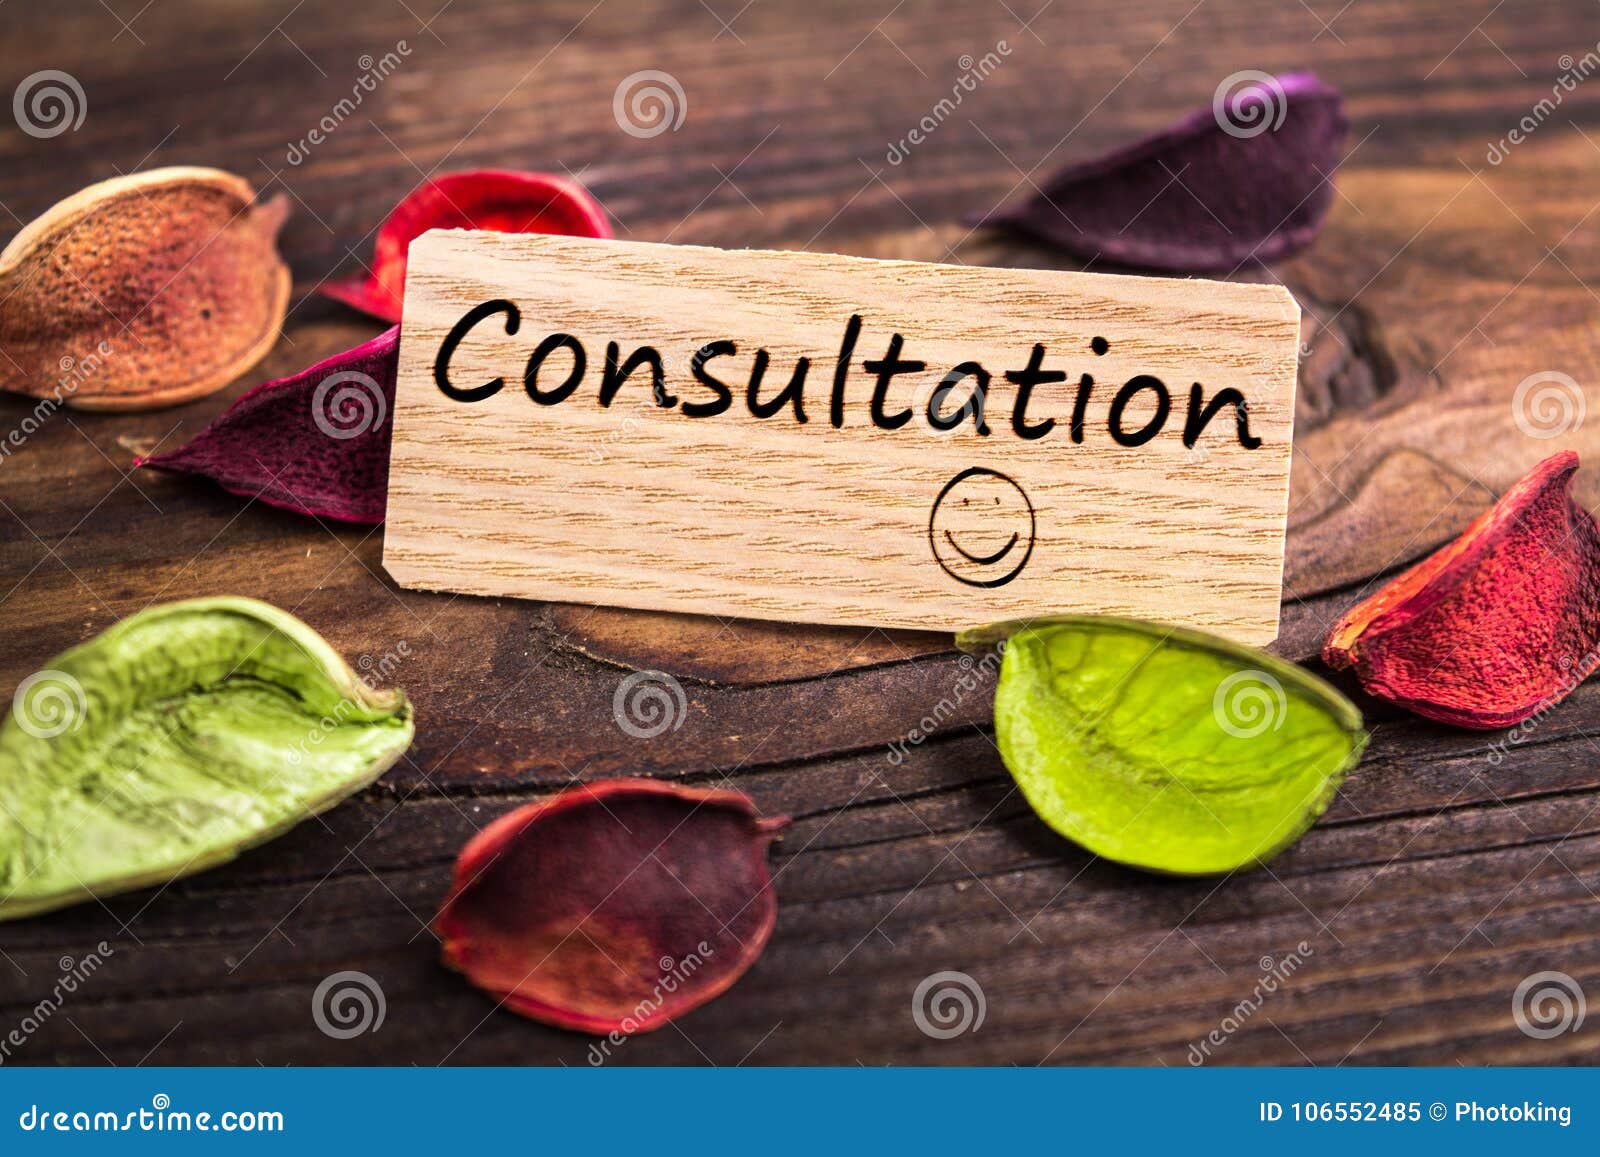 consultation word in card